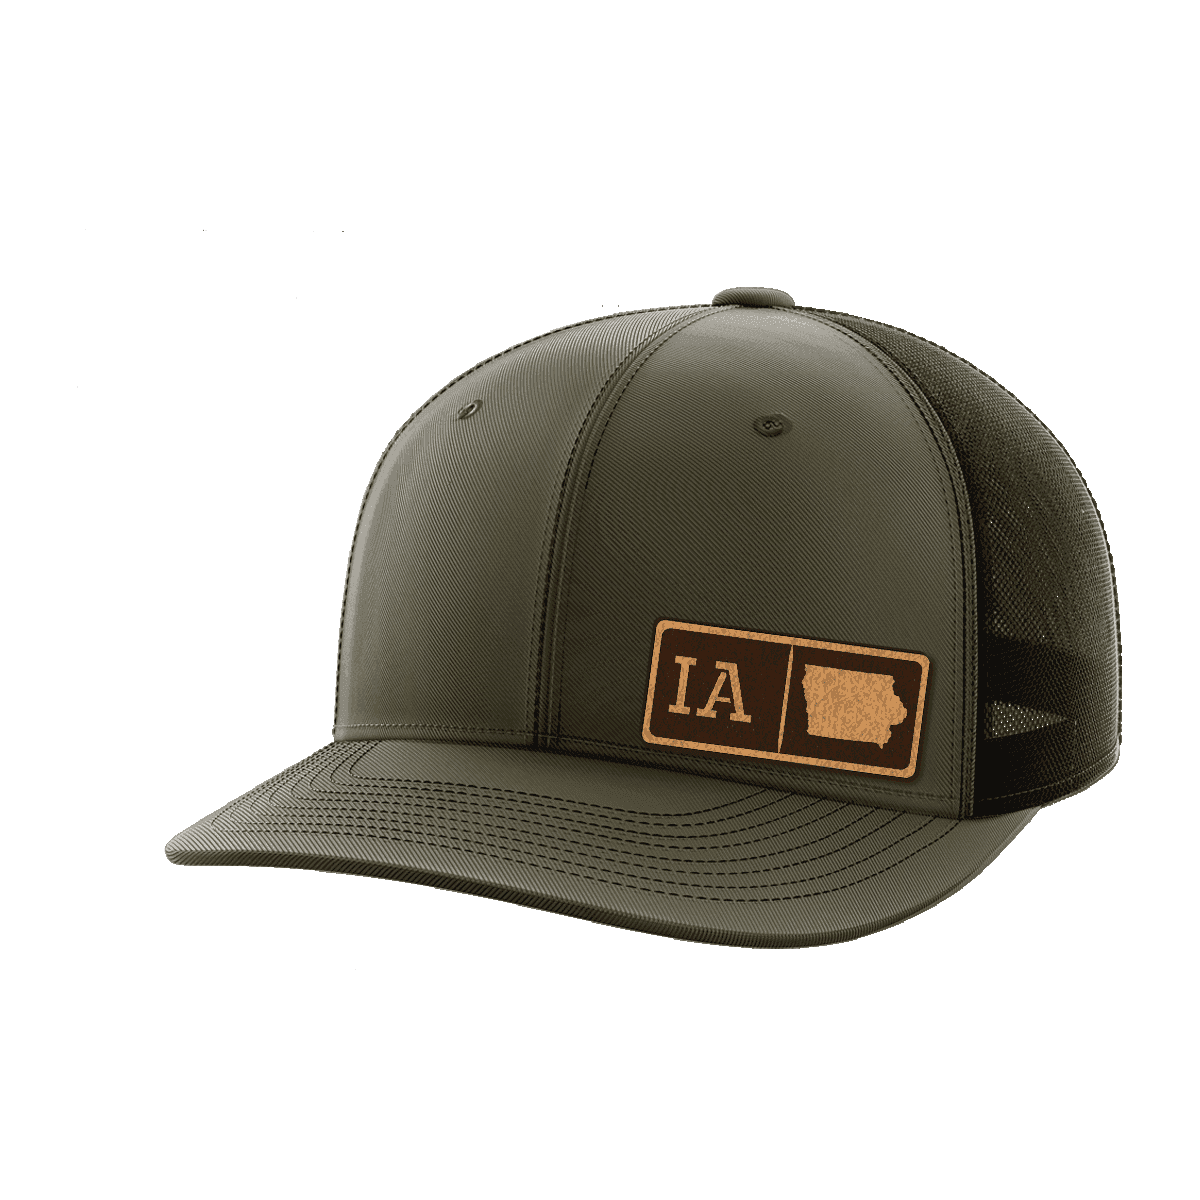 Thumbnail for Iowa Homegrown Hats - Greater Half